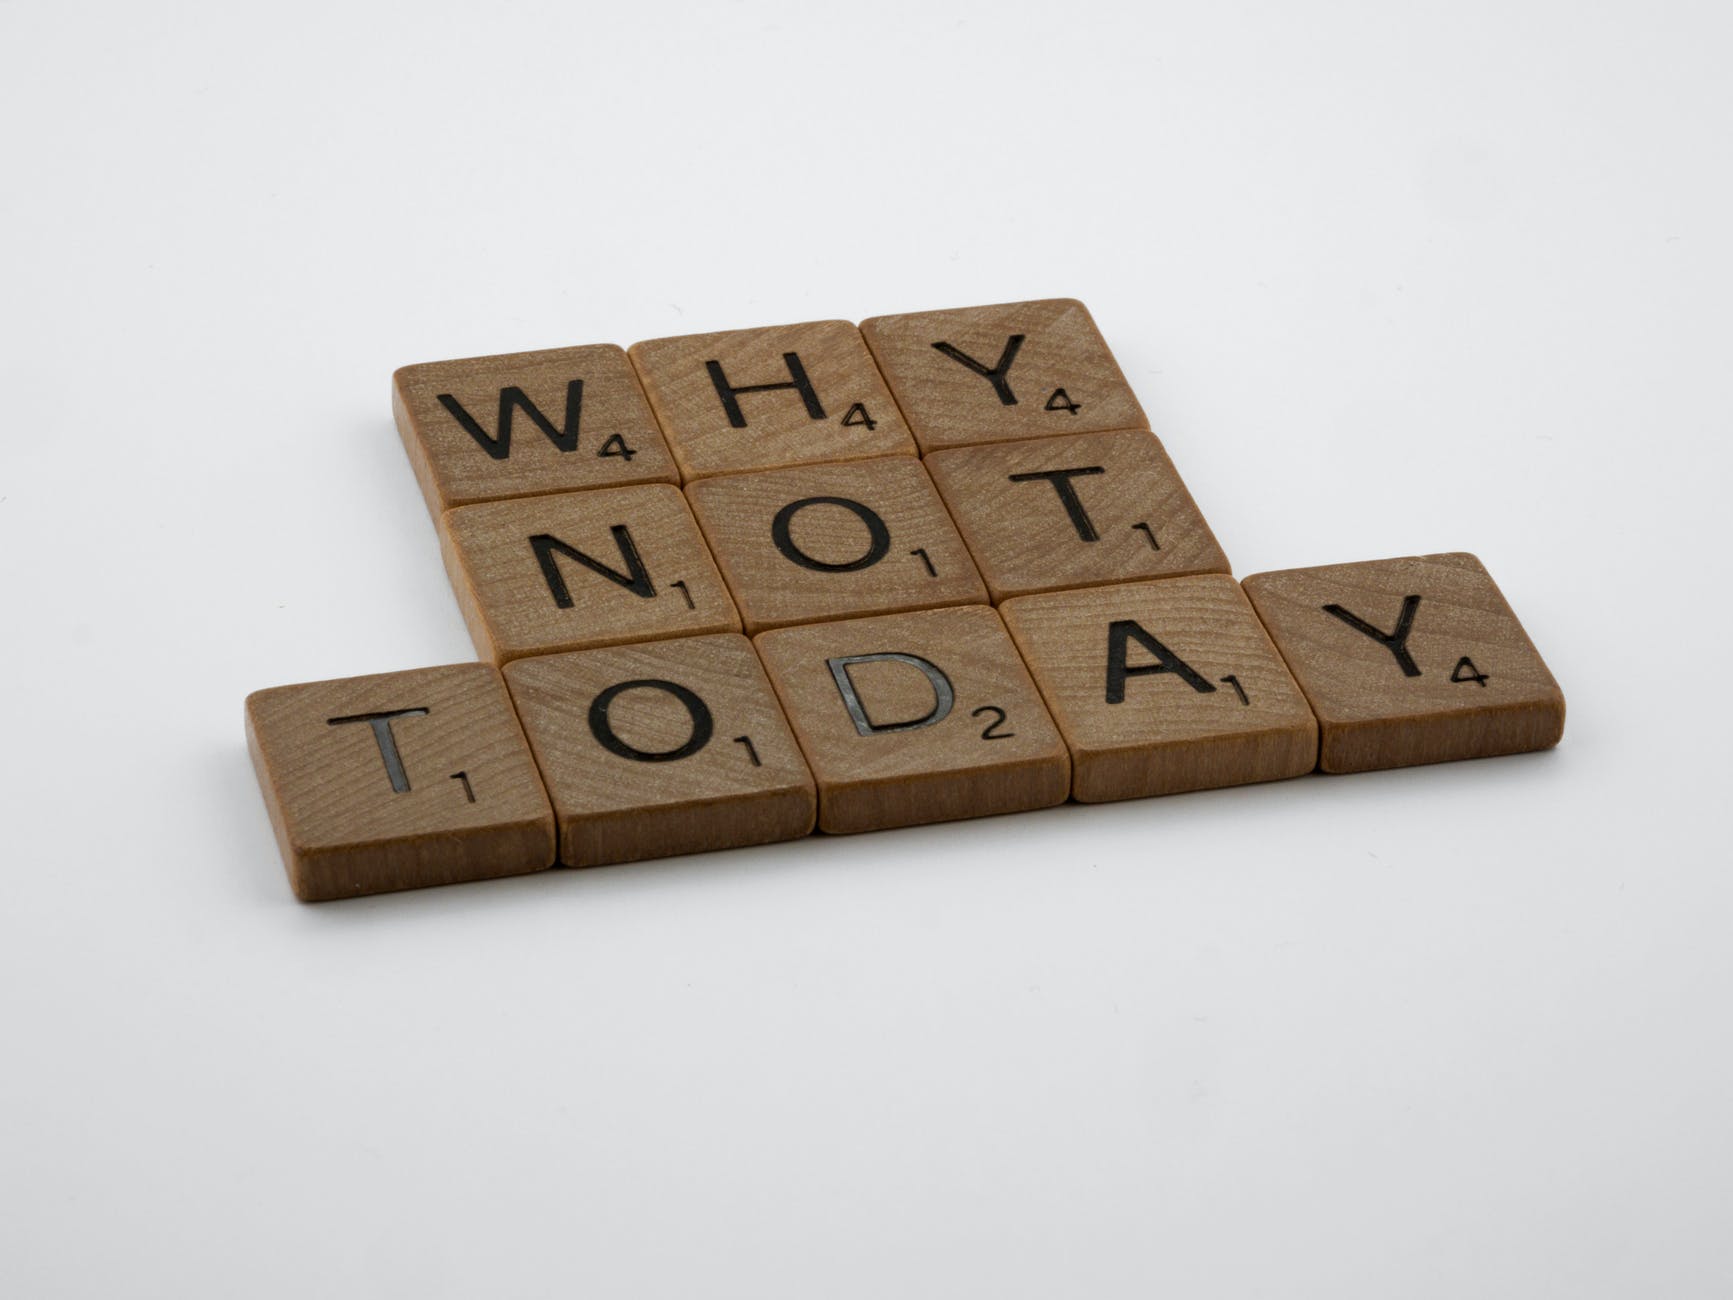 Why Not Today - there is no time like the present to get going on the things that make you happy